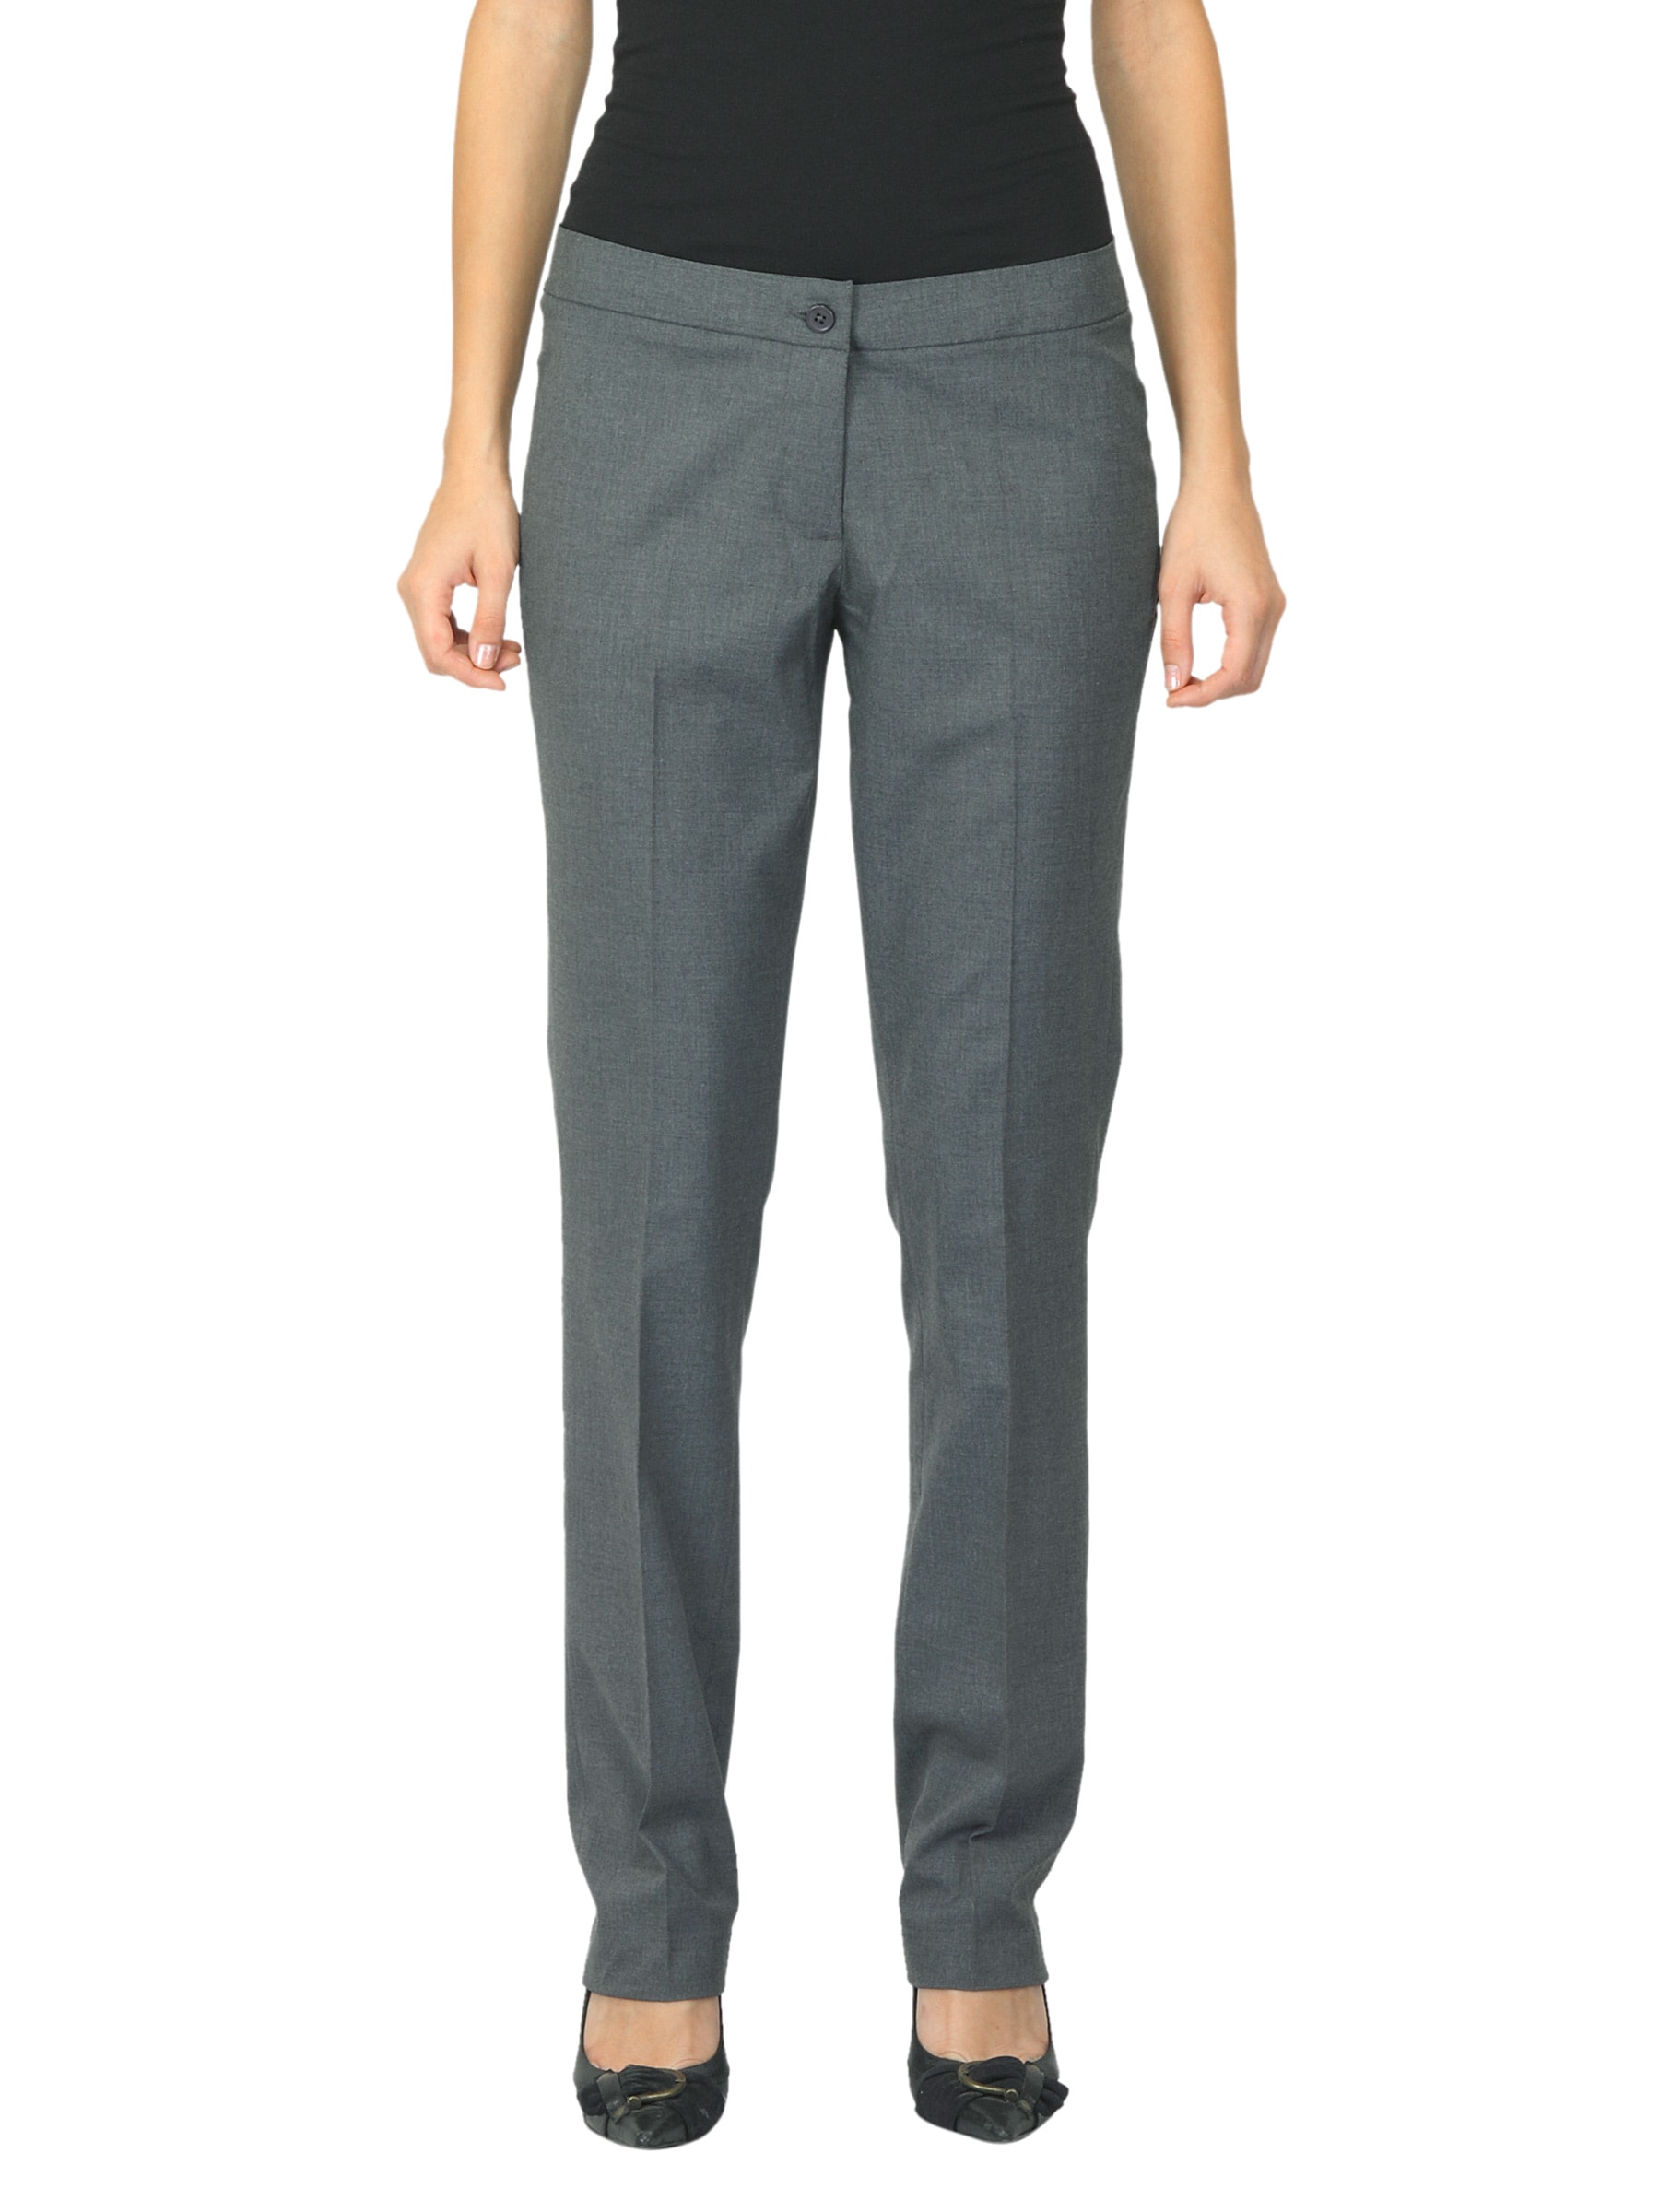 Scullers For Her Grey Trousers